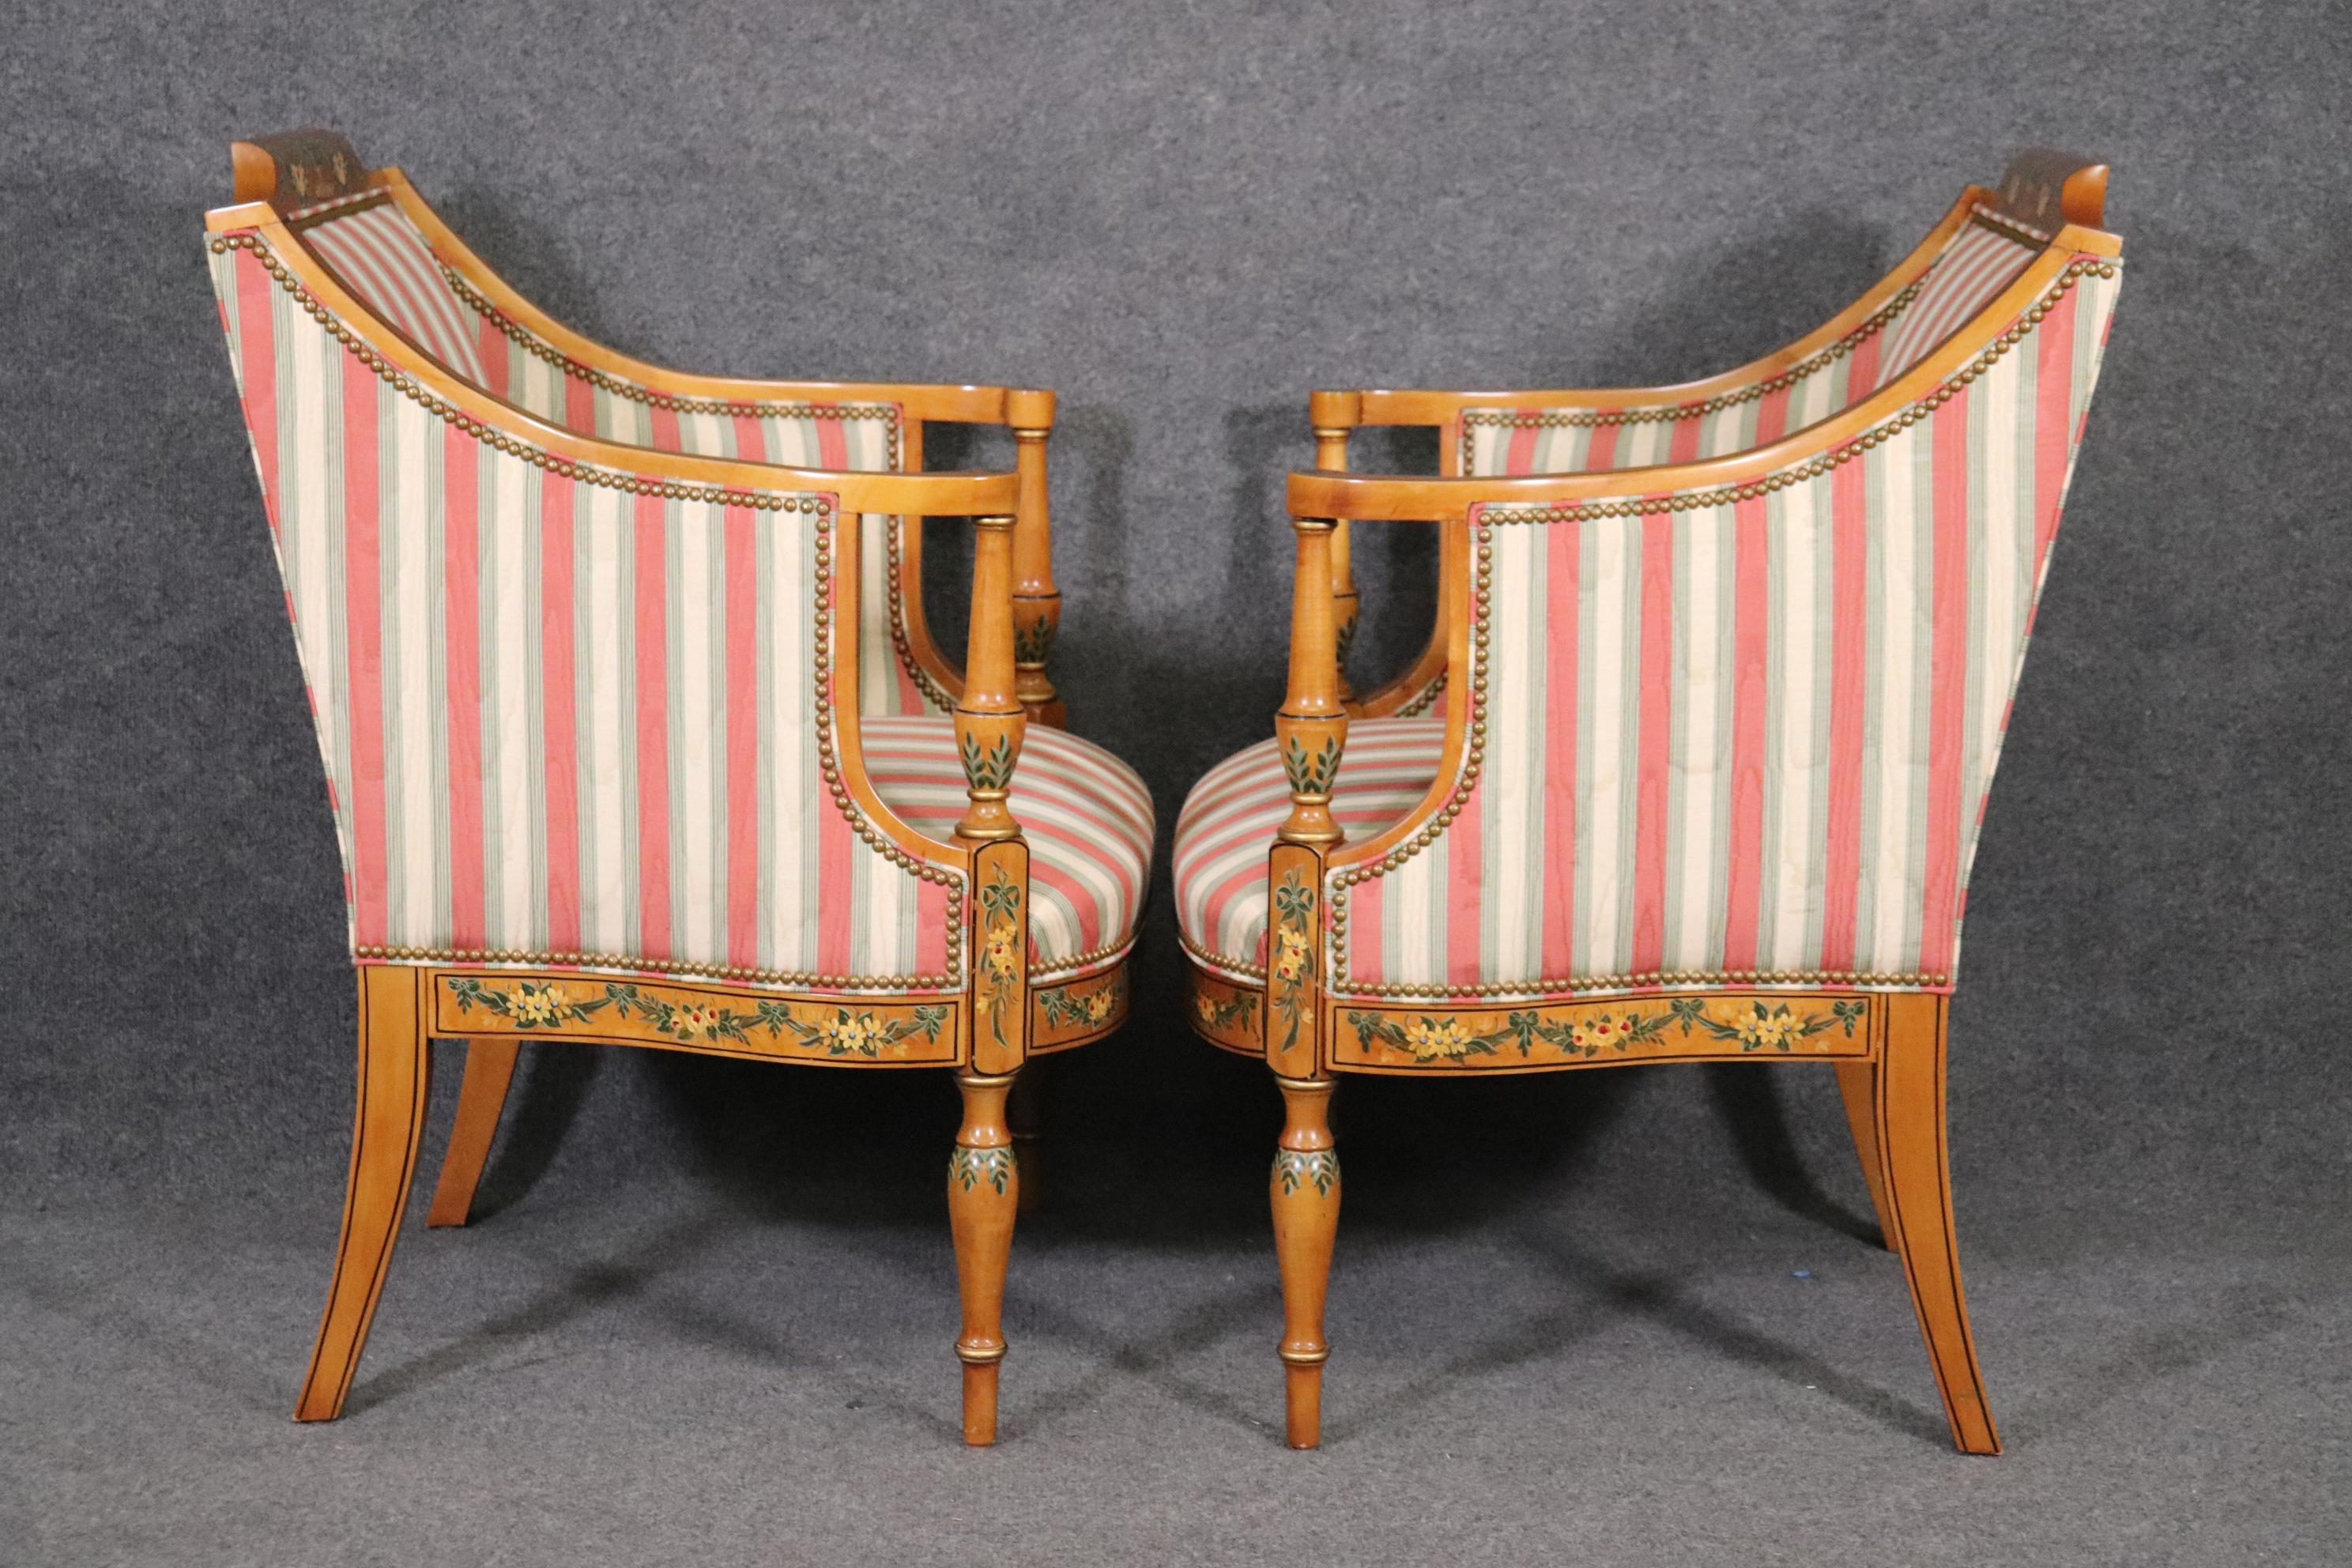 Contemporary Fine Hand-Painted Pair of Adams Style Satinwood Bergere Chairs